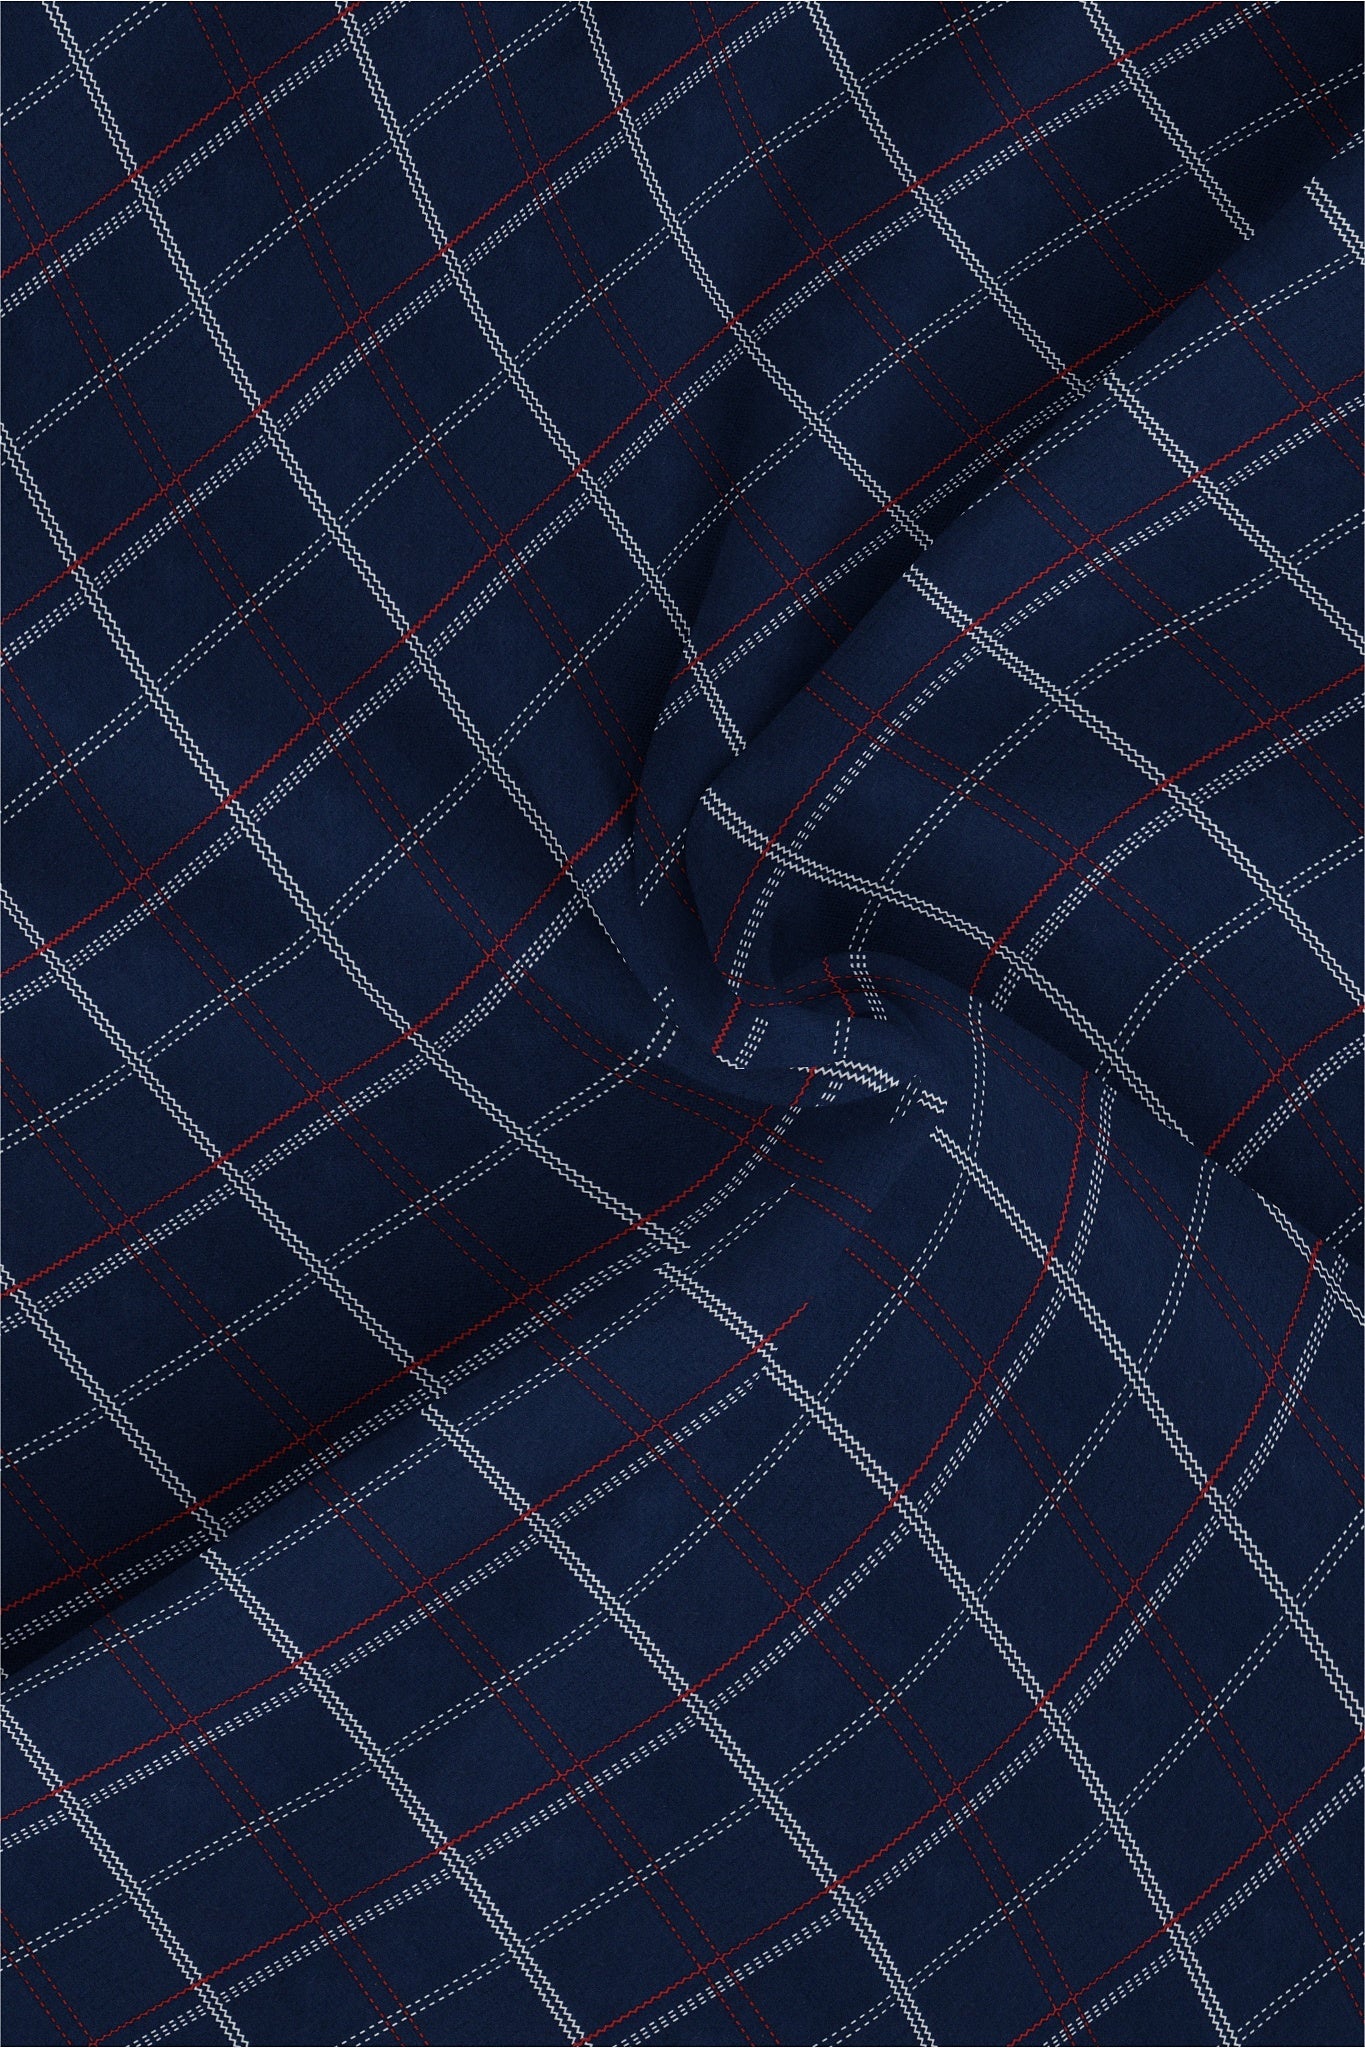 Denim Blue with Navy and Chili Red Altered Broken Checks Men's Cotton Shirt